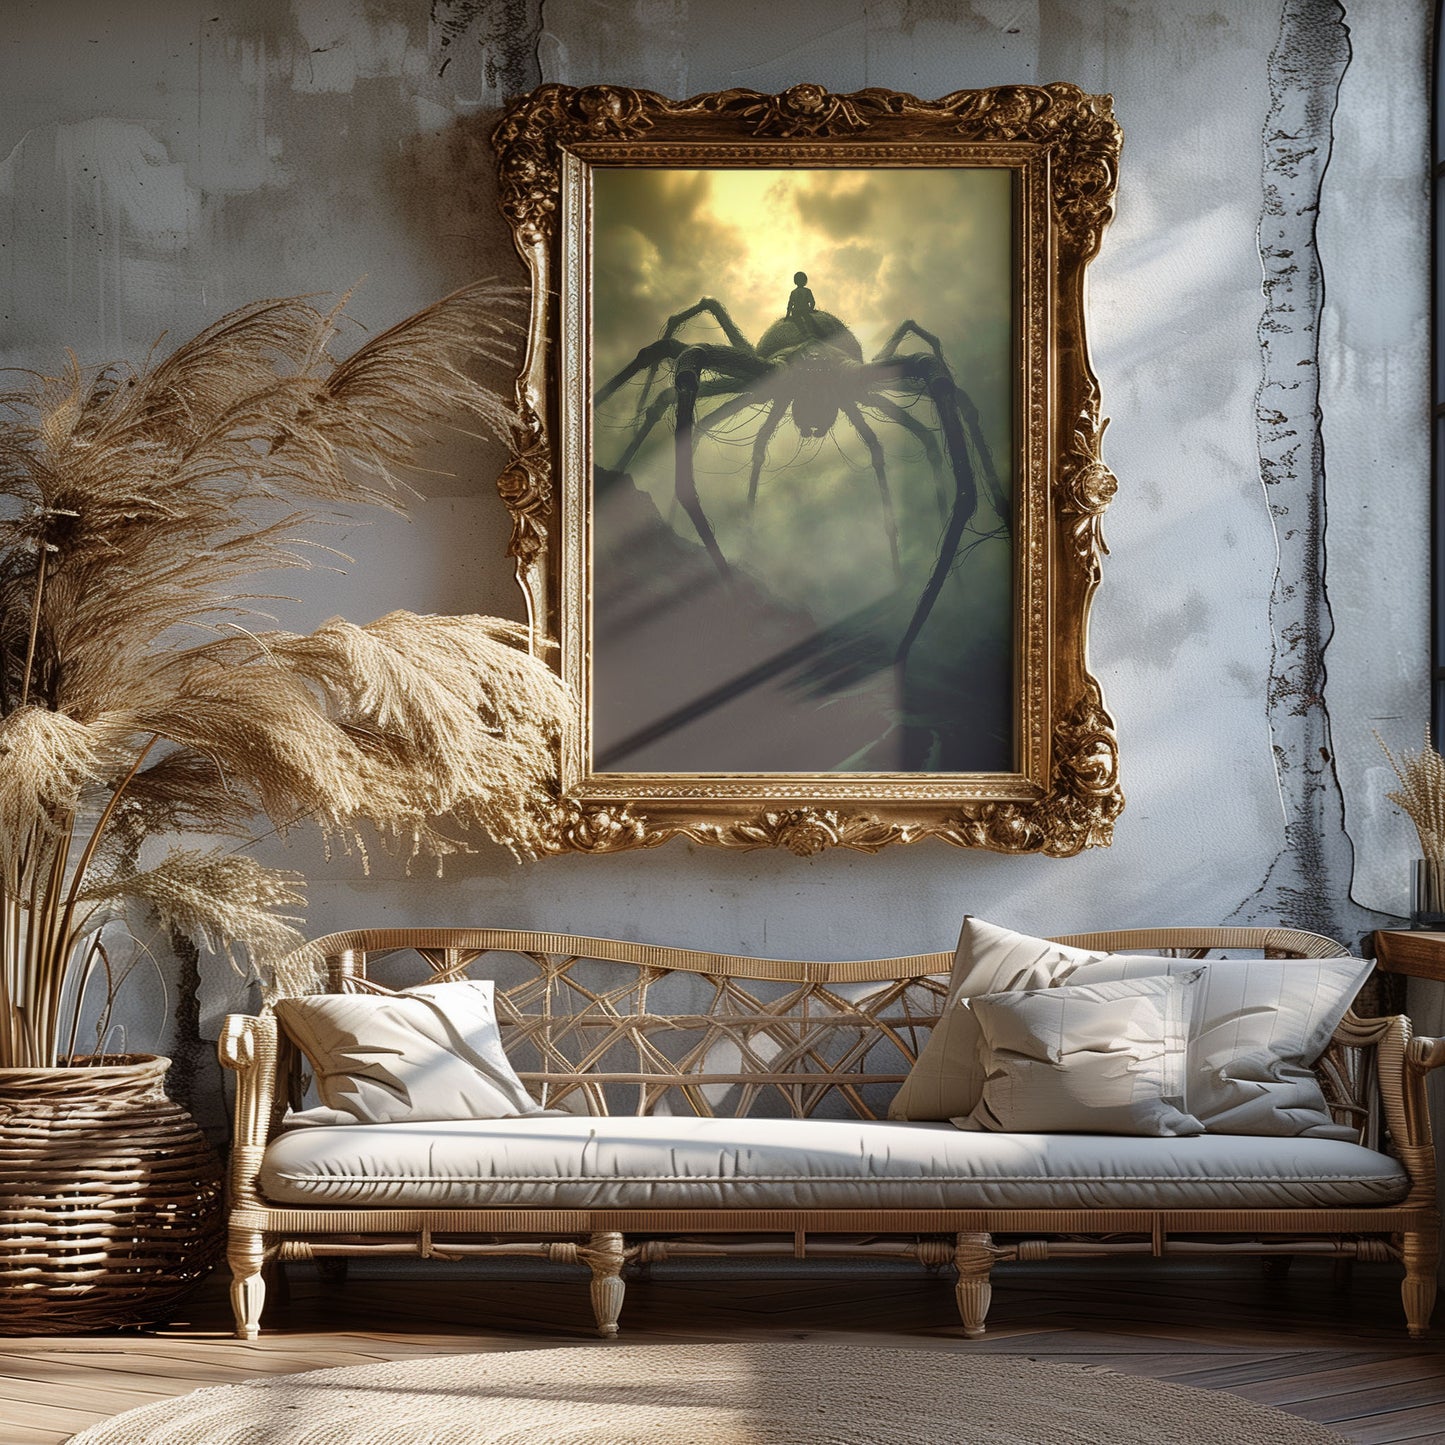 Spooky Spiderboy Wall Art: Huge Creepy Spider Poster - Gothic Print